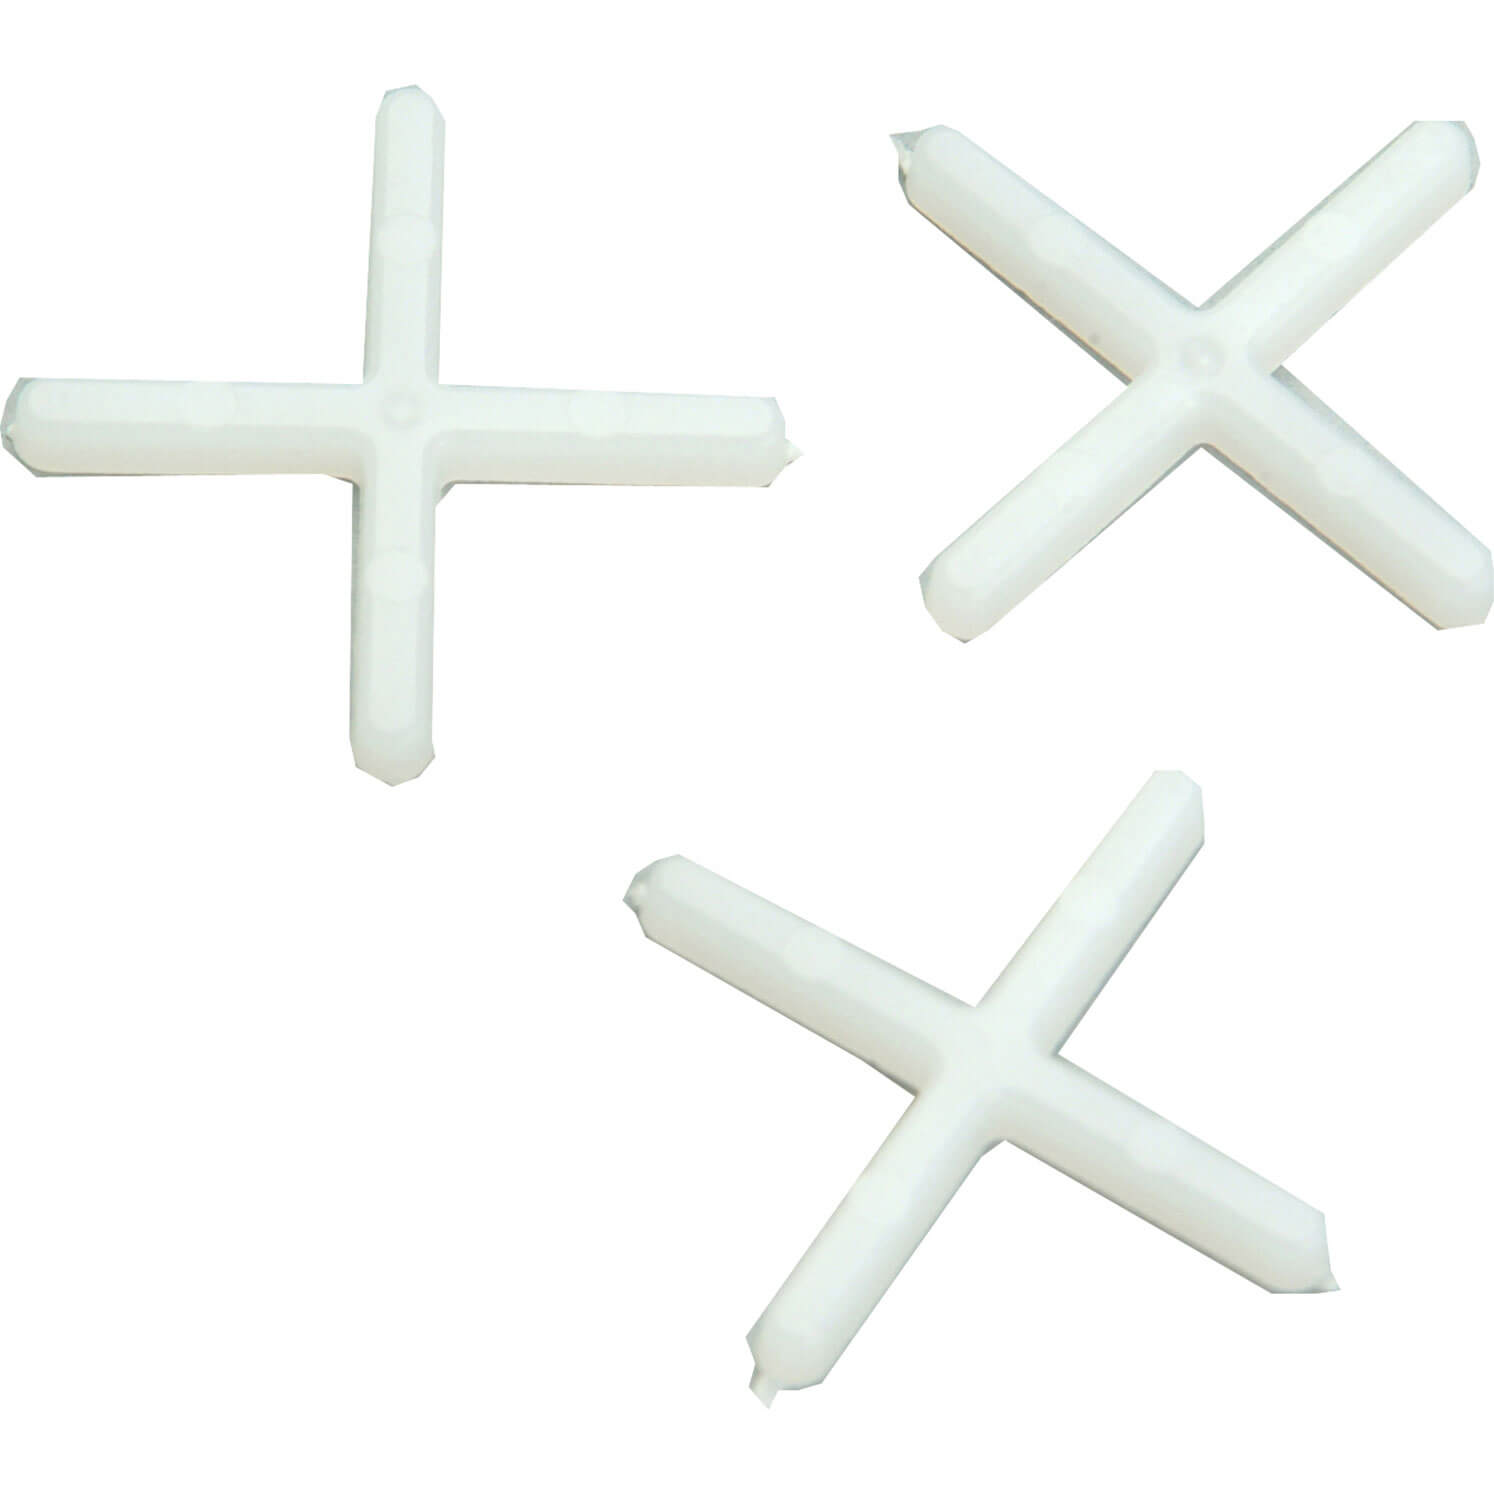 Image of Vitrex Plastic Wall Tile Spacers 1.5mm Pack of 1000